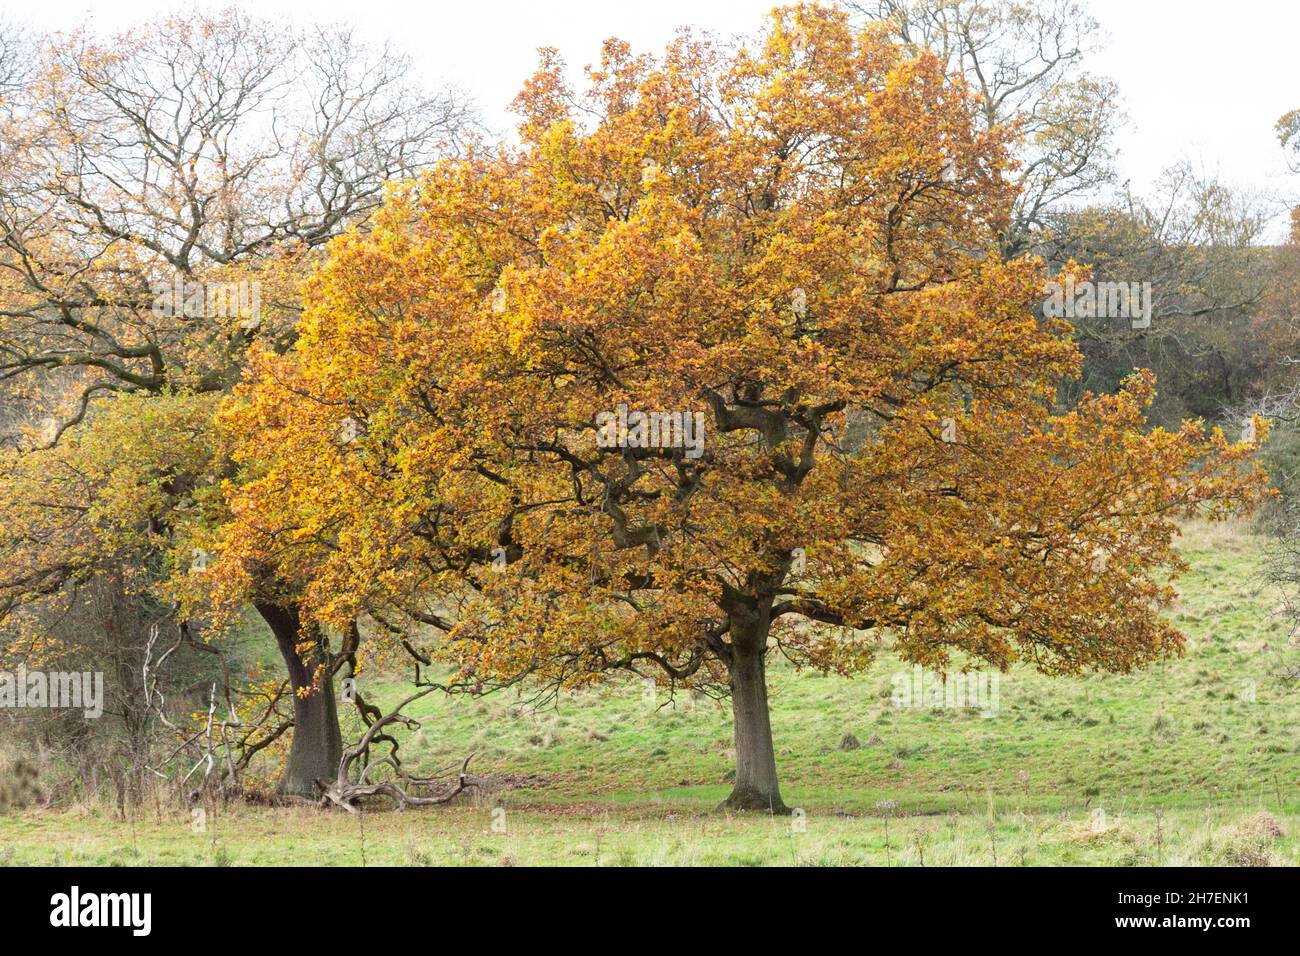 An old English Oak tree in autumn. The leaves turn golden before leaf fall. Stock Photo